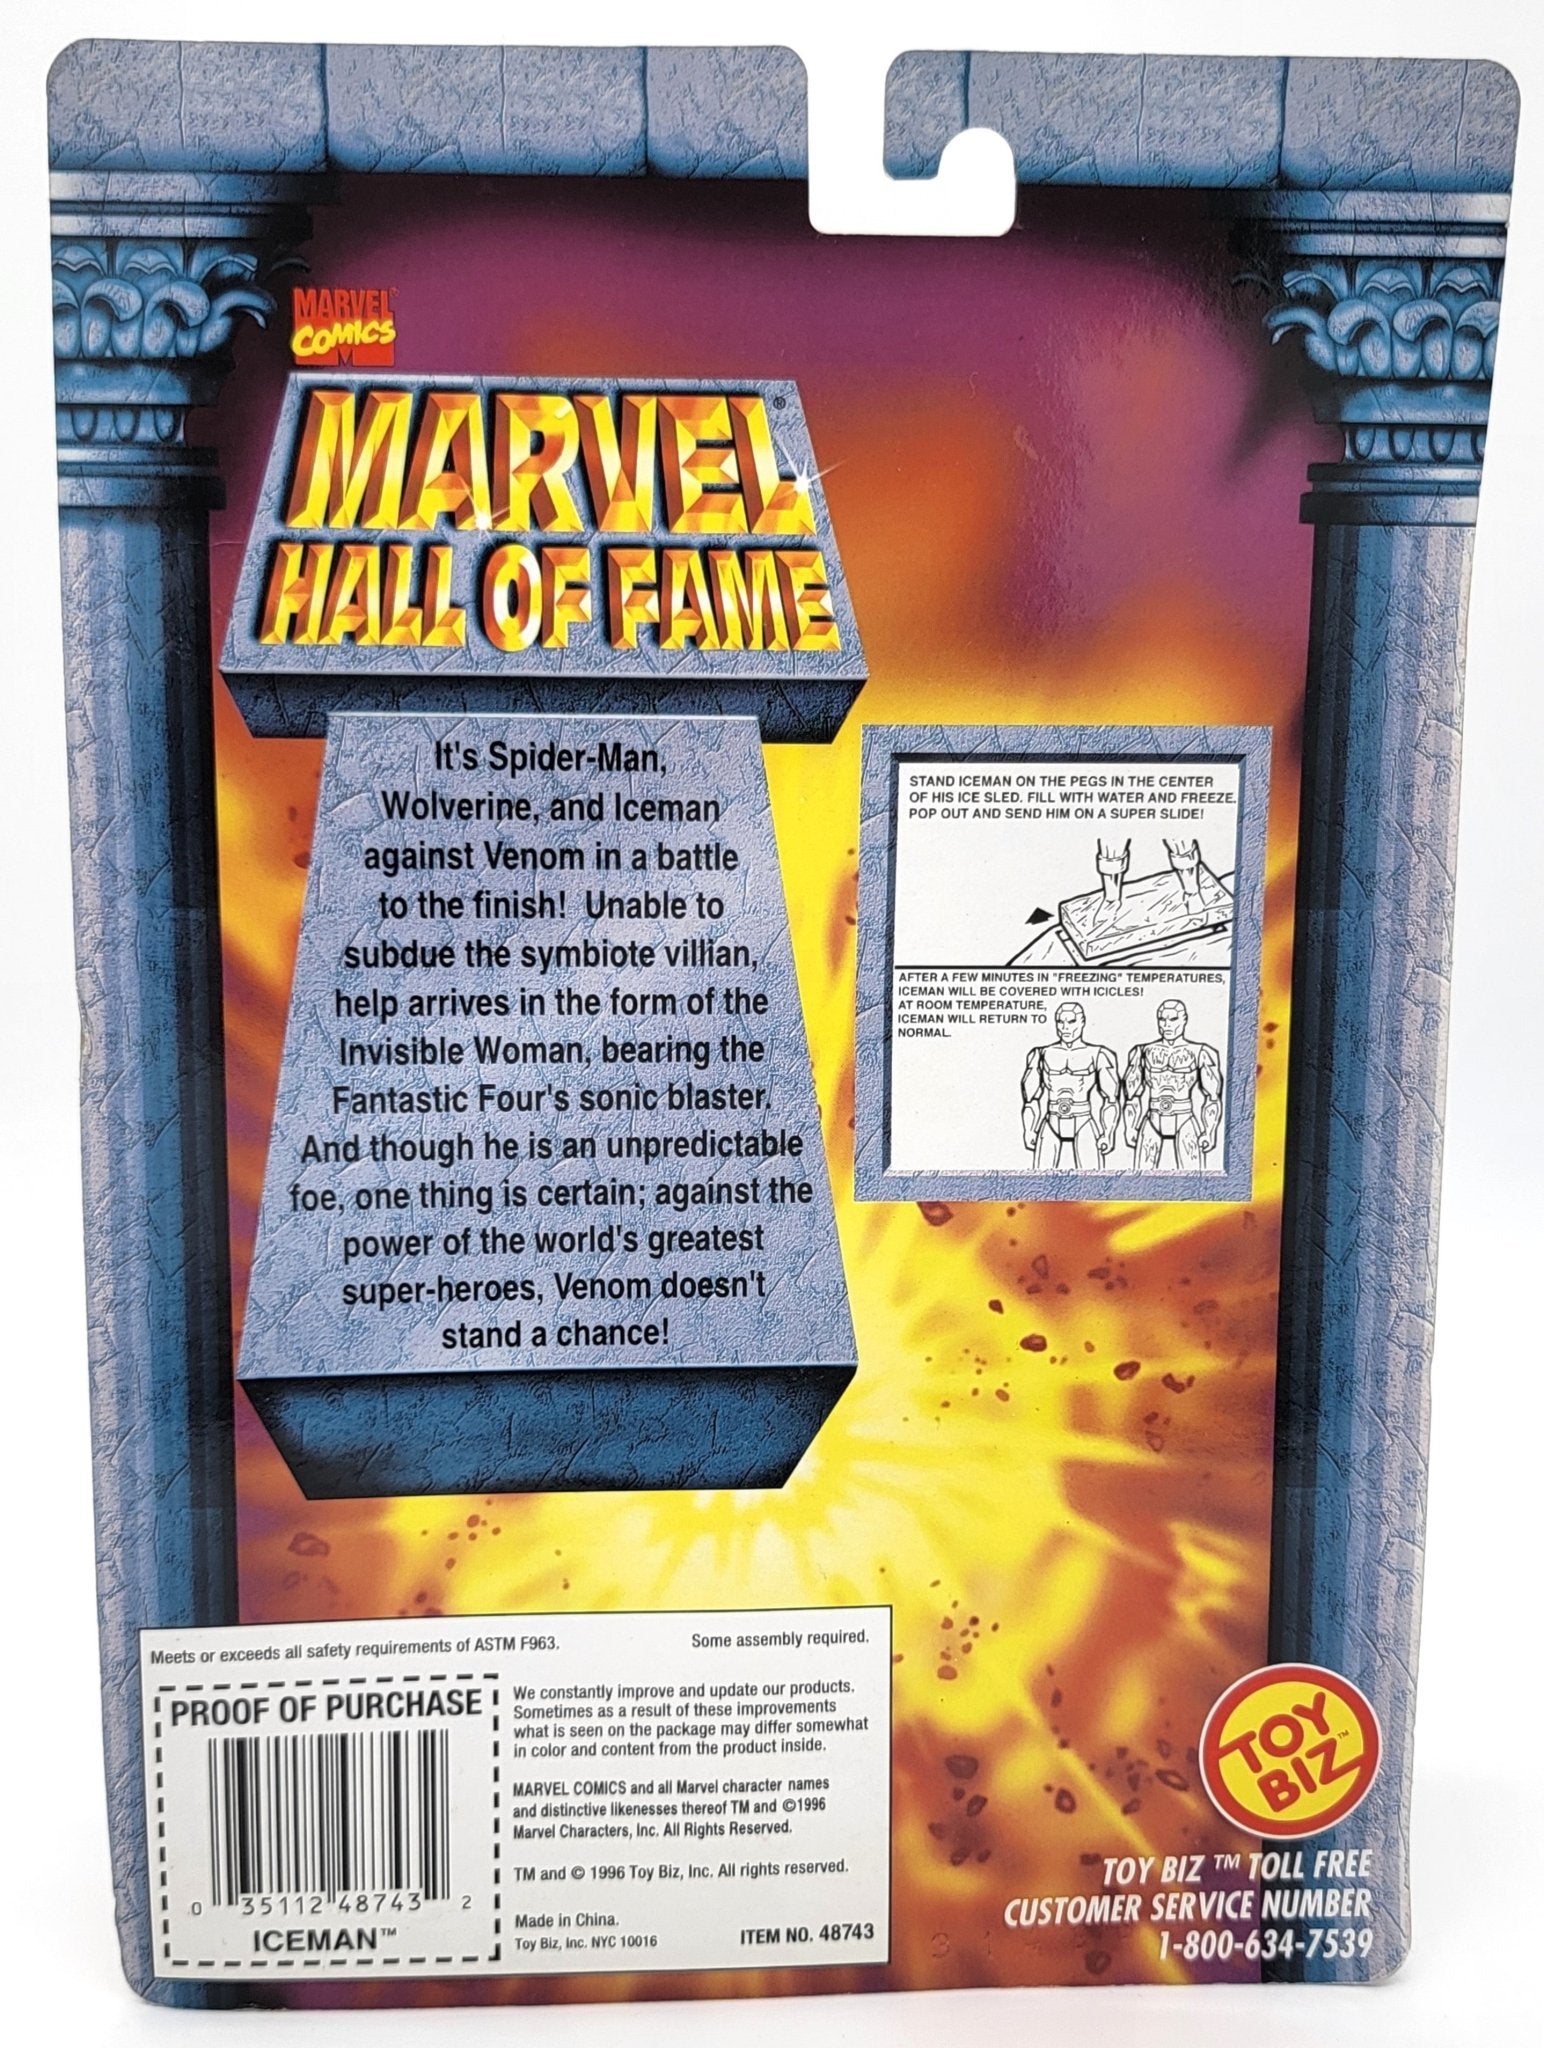 Toy Biz - Toy Biz | Marvel Hall of Fame - Iceman 1996 | Vintage Action Figure - With trading card - Action Figures - Steady Bunny Shop